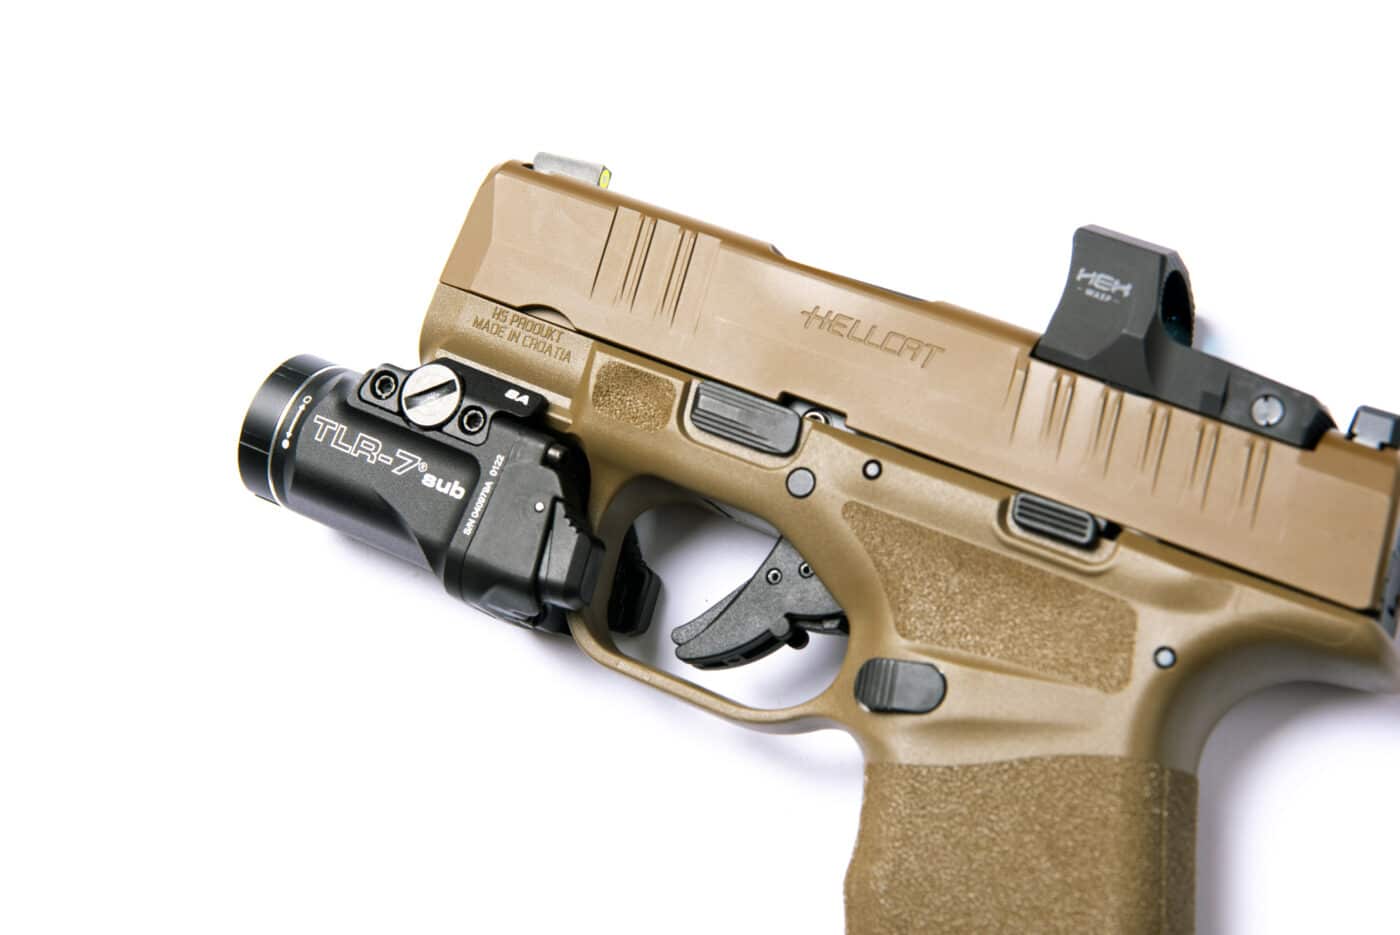 Springfield Hellcat pistol with Streamlight TLR-7 Sub weaponlight mounted